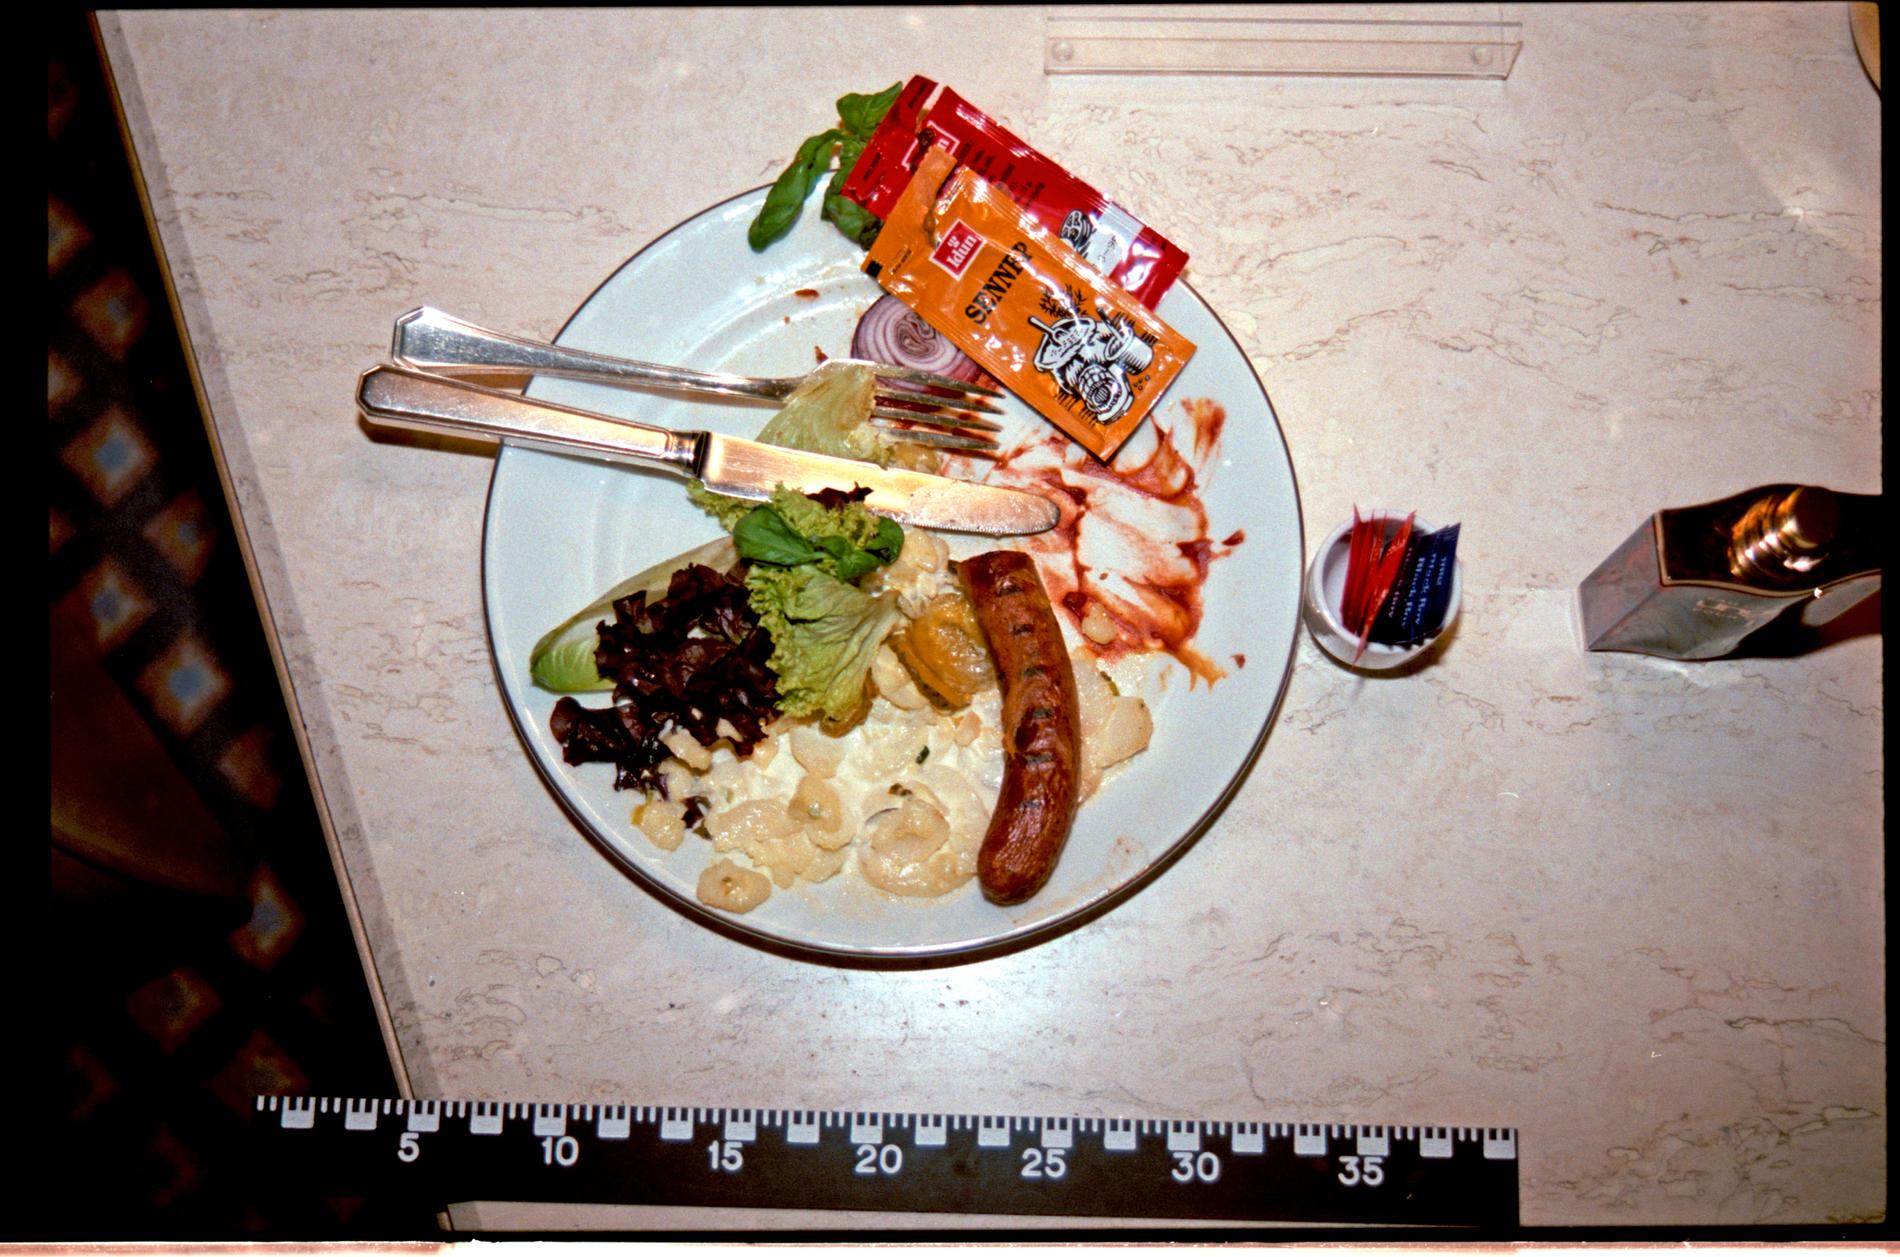 LAST MEAL: The plate of sausages and potato salad was ordered through room service. 